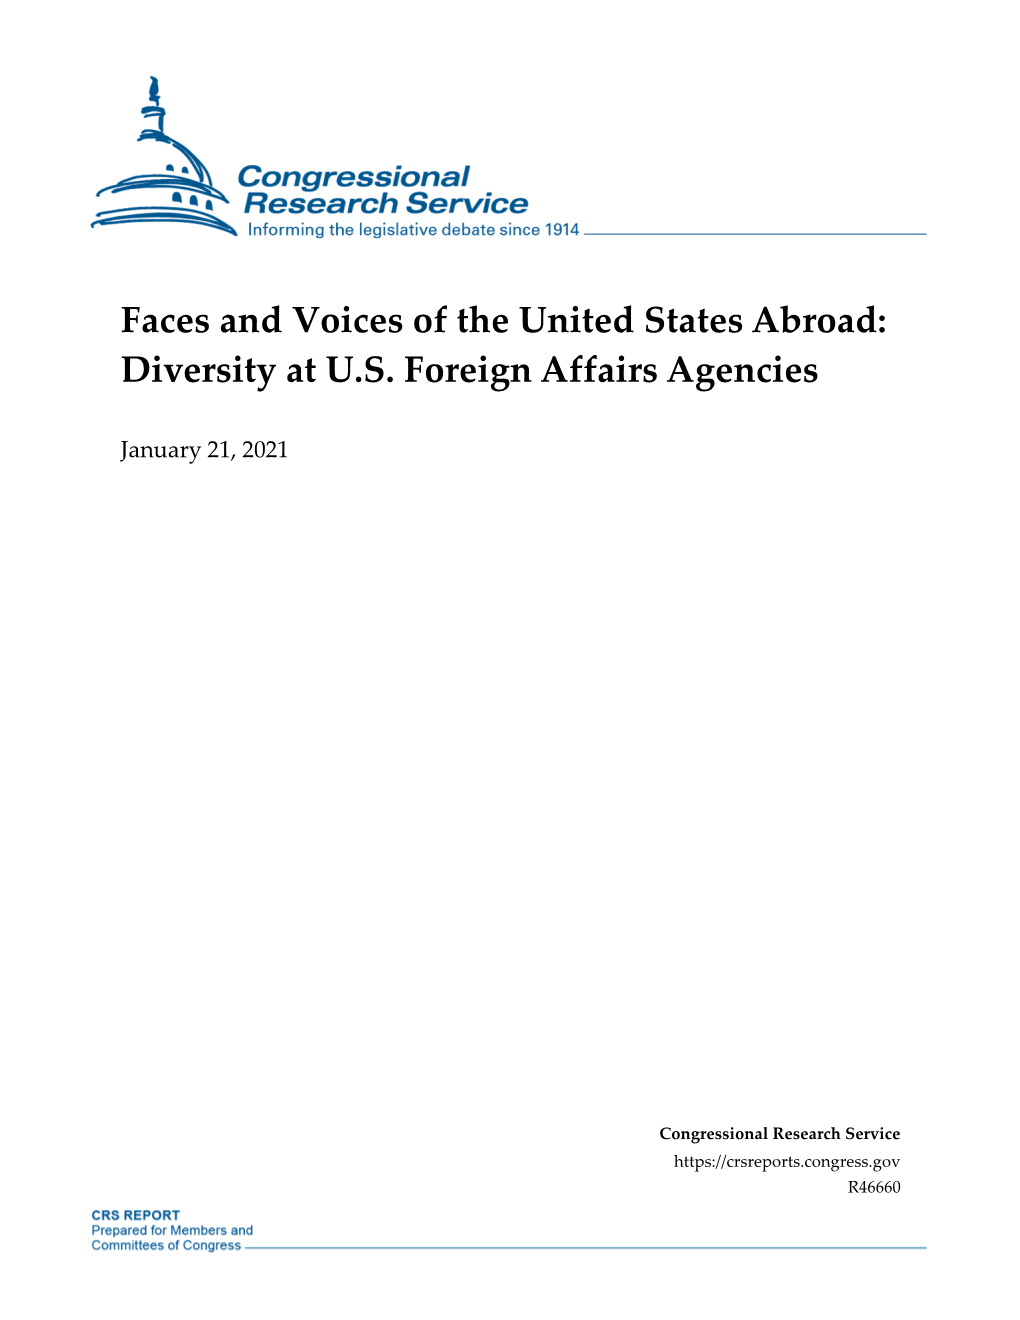 Faces and Voices of the United States Abroad: Diversity at U.S. Foreign Affairs Agencies